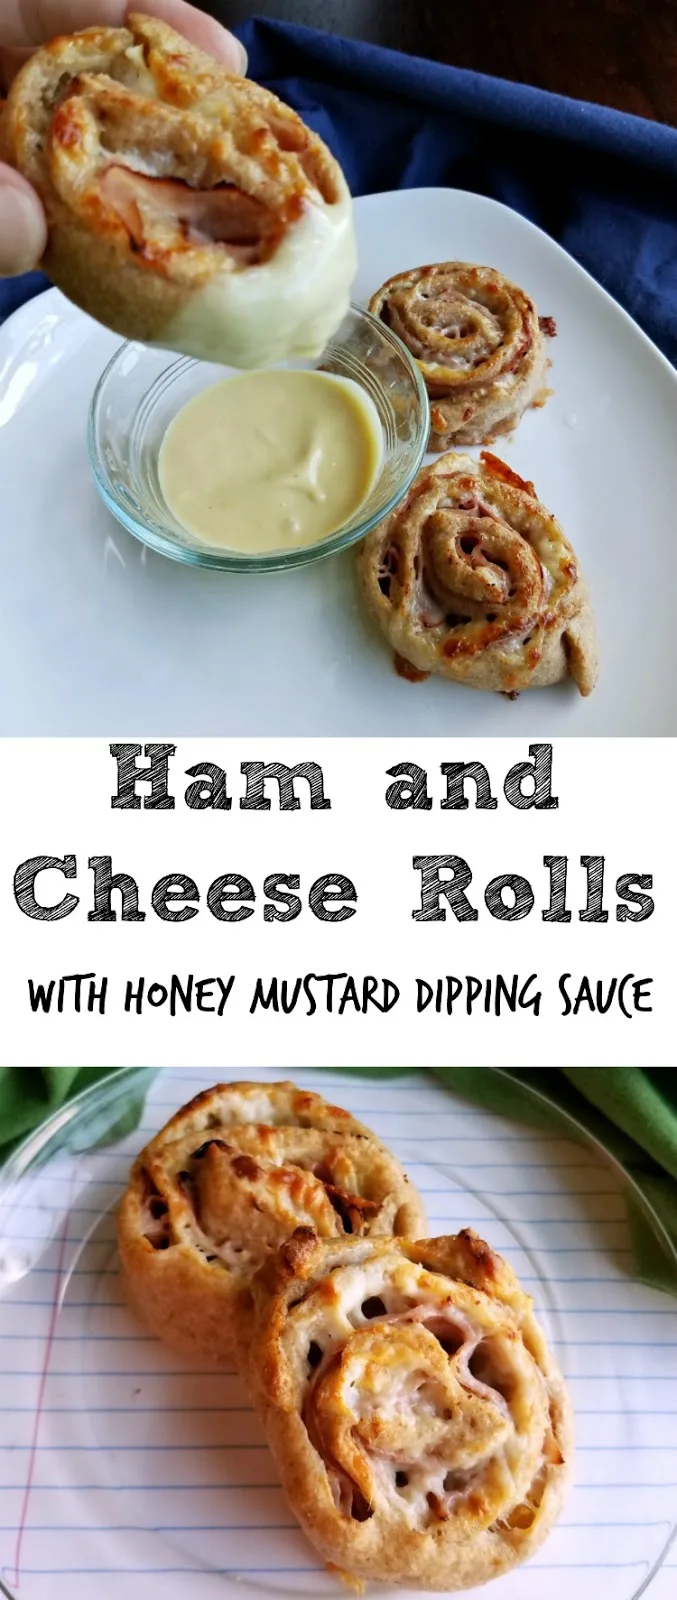 These take the classic ham and cheese sandwich to a fun new level! Make the honey mustard dipping sauce to bring it all together. Whether you need a fun new lunch idea or a hearty savory snack, these will surely do the trick!